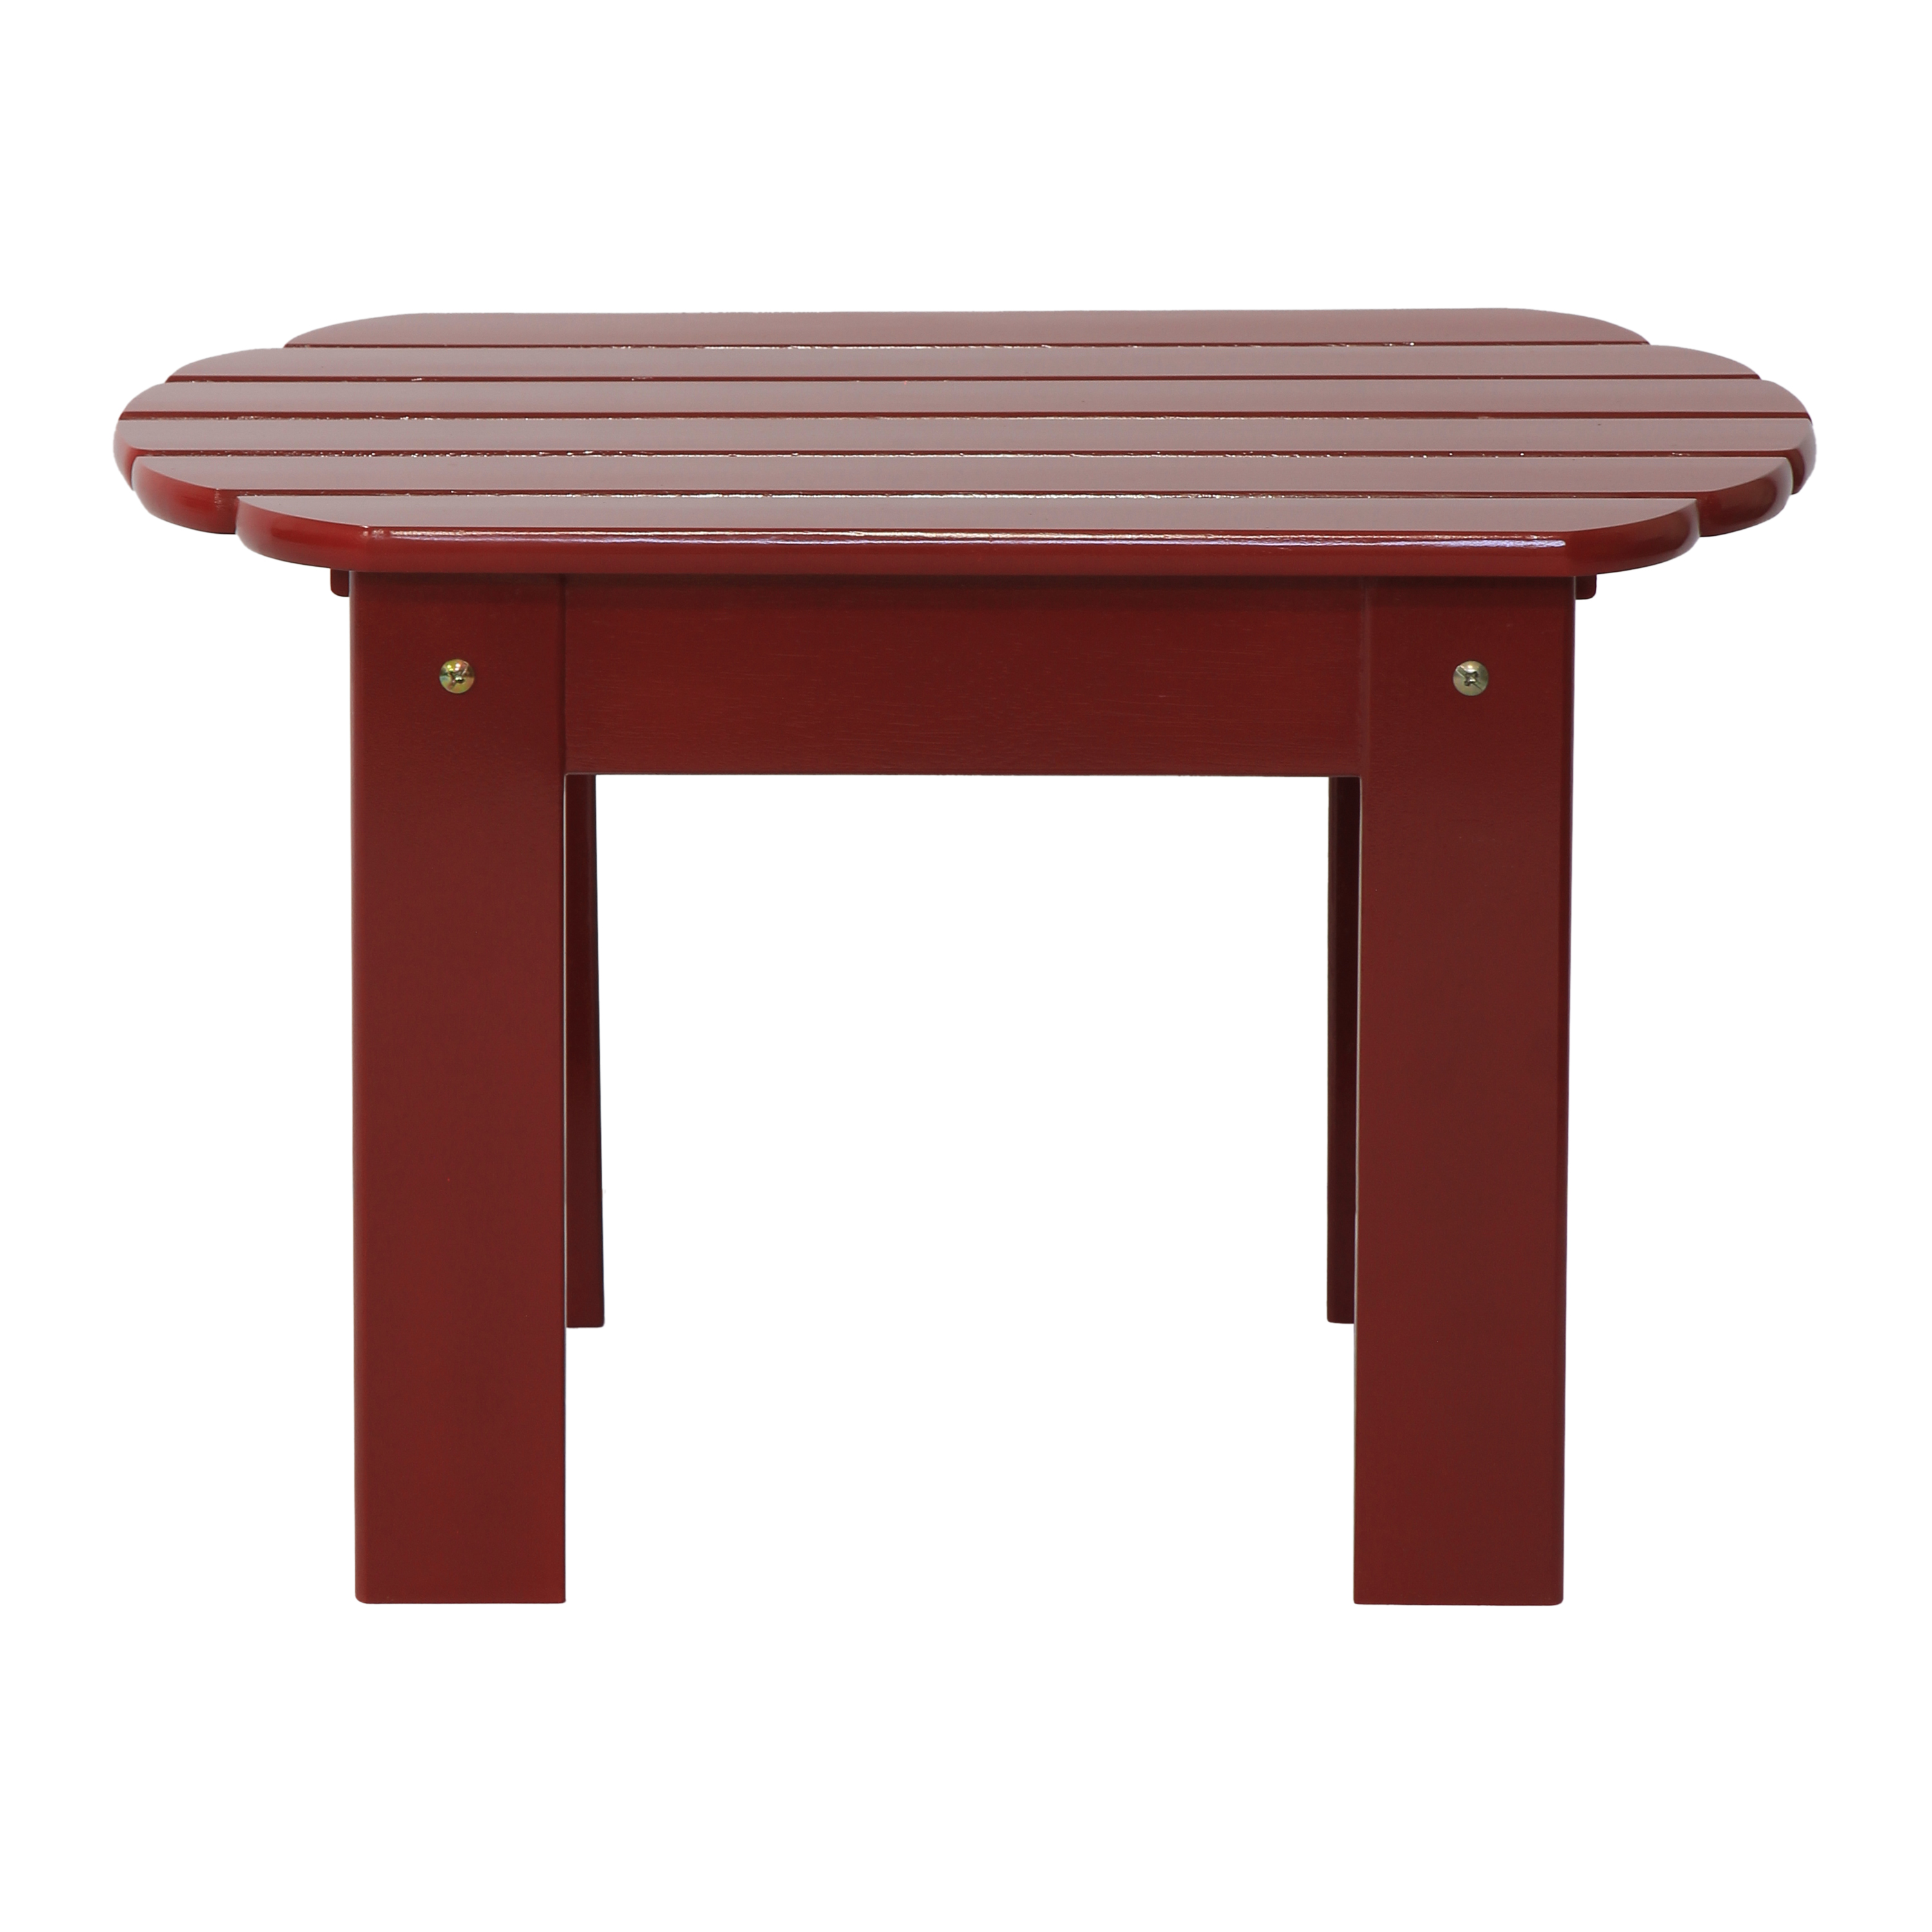 Mainstays Wood Adirondack Outdoor Side Table, Red - image 5 of 6